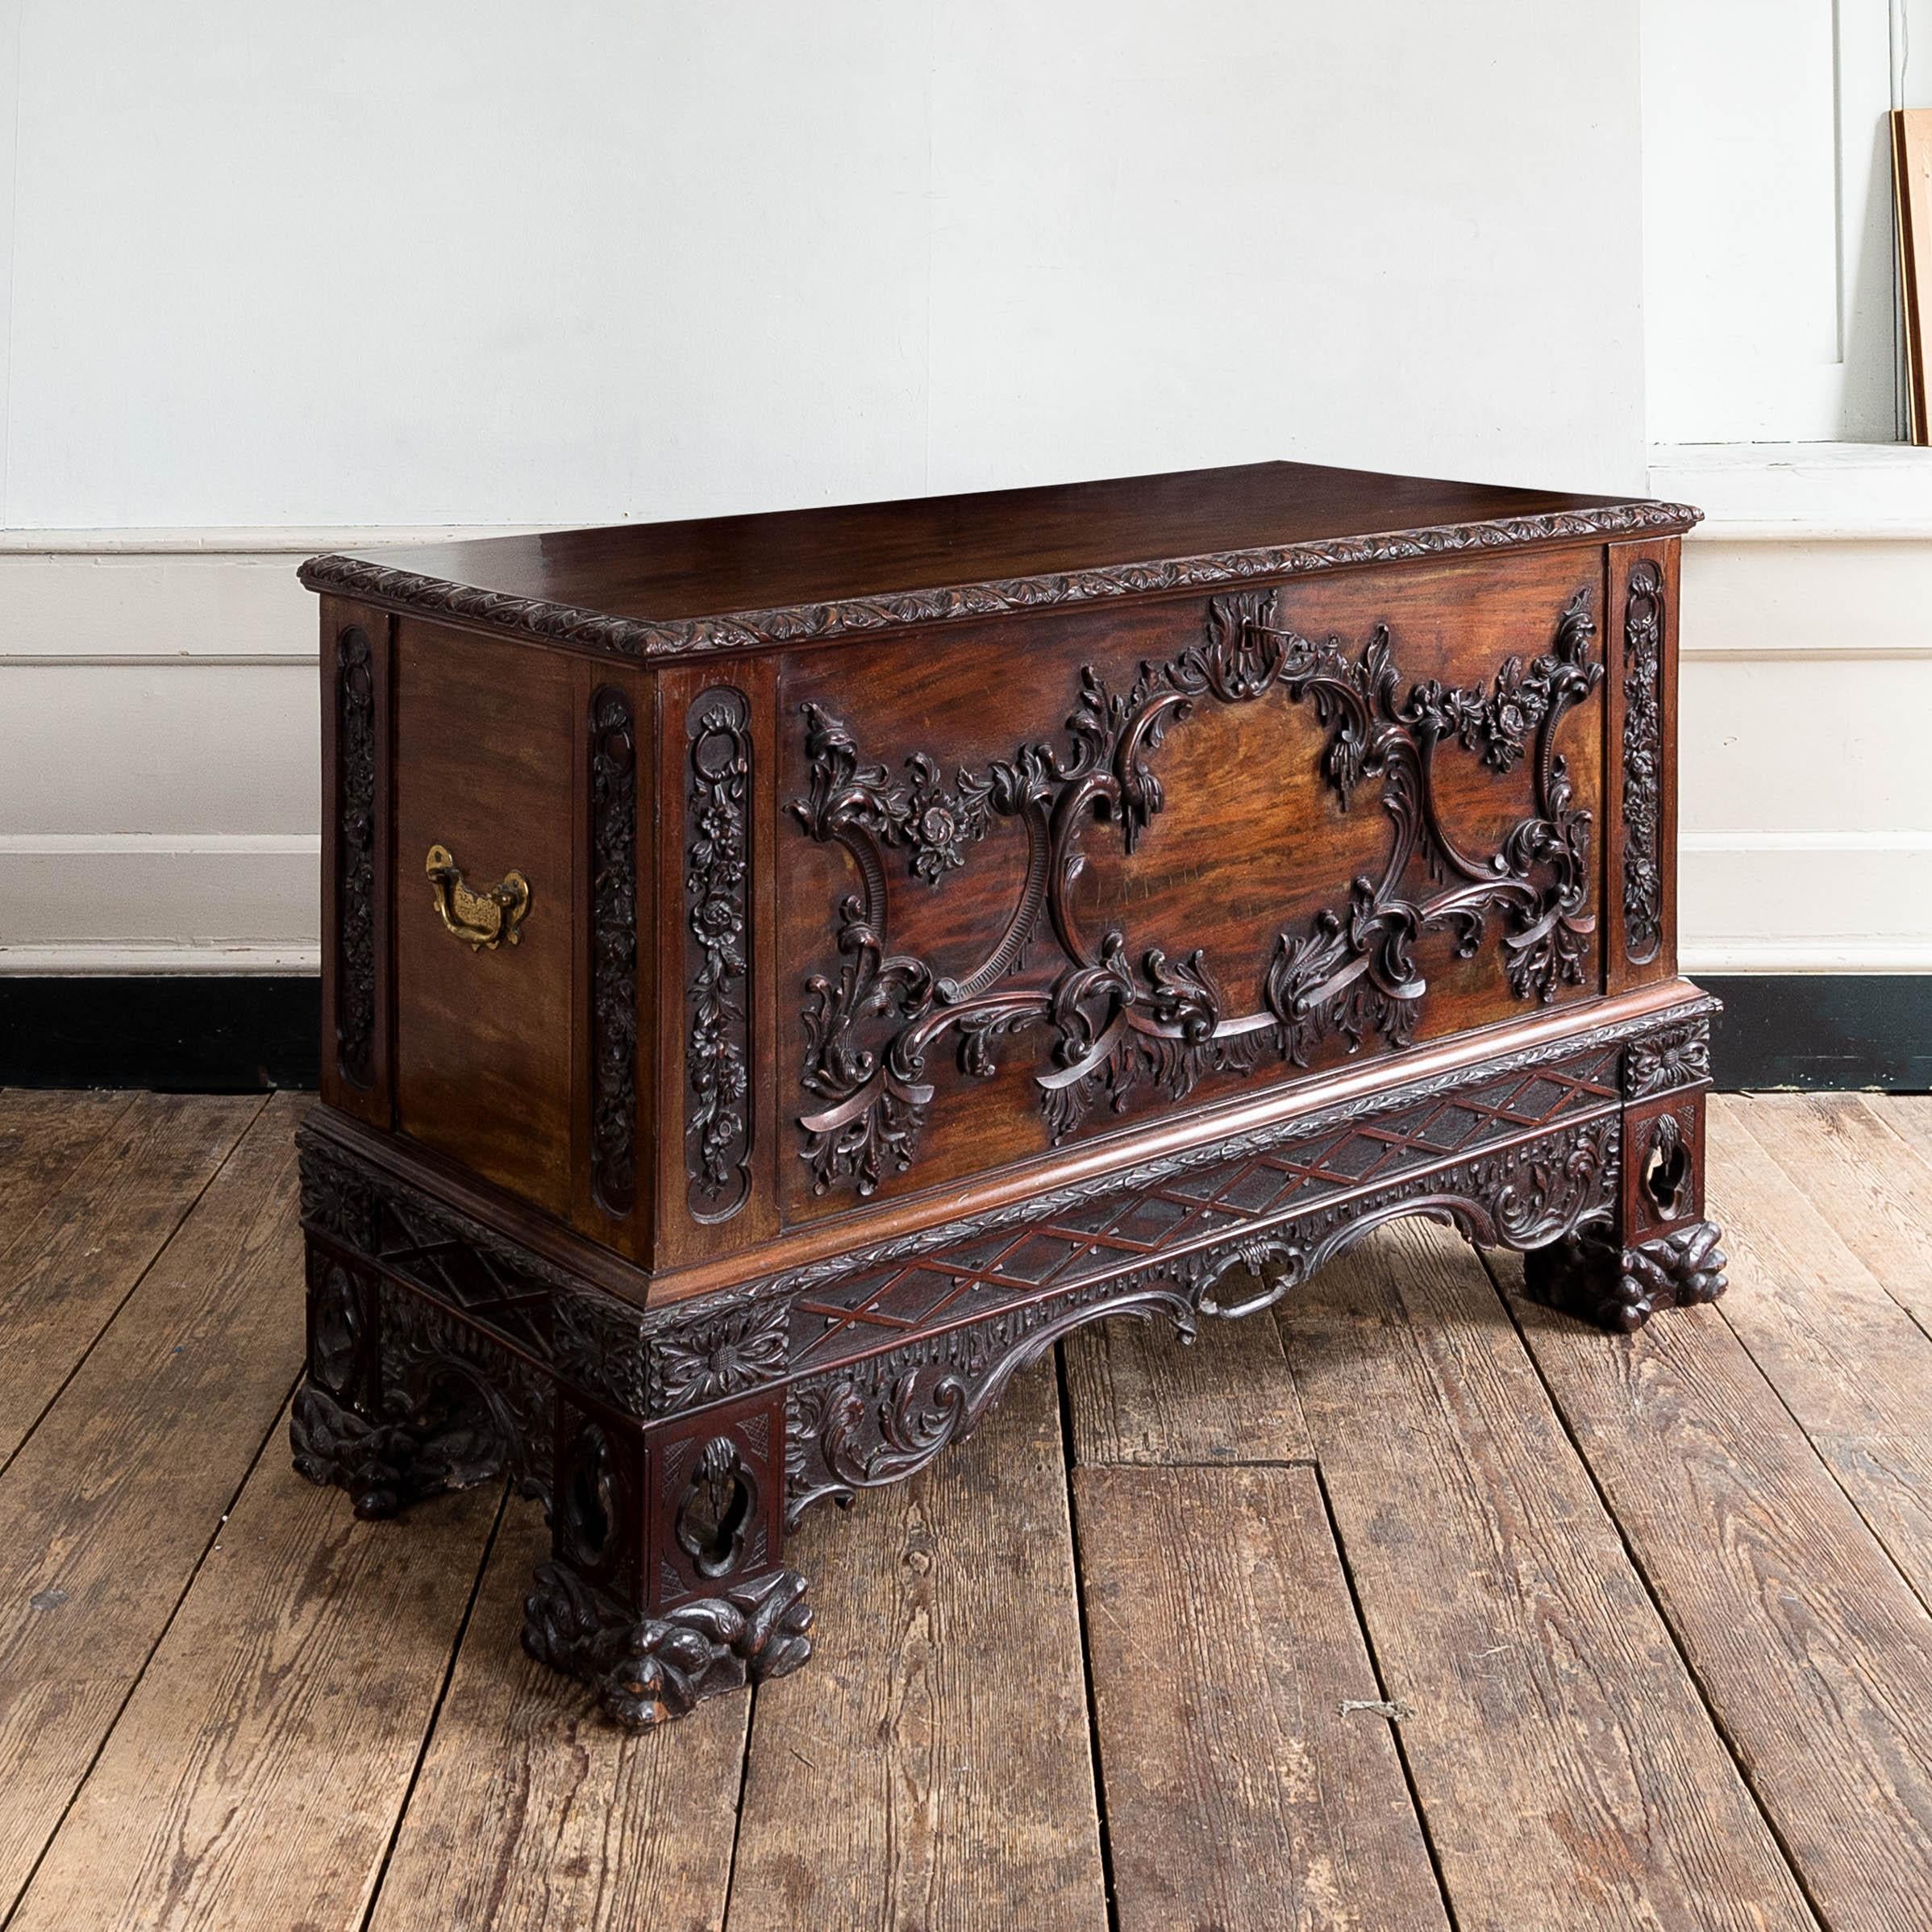 A fine and exuberantly carved mahogany chest, a nineteenth century interpretation of a mid-eighteenth century design by Thomas Chippendale, see 'Gentleman and Cabinet-Maker's Director', 1763, pl. CXXVIII,

The front centred by a cartouche composed